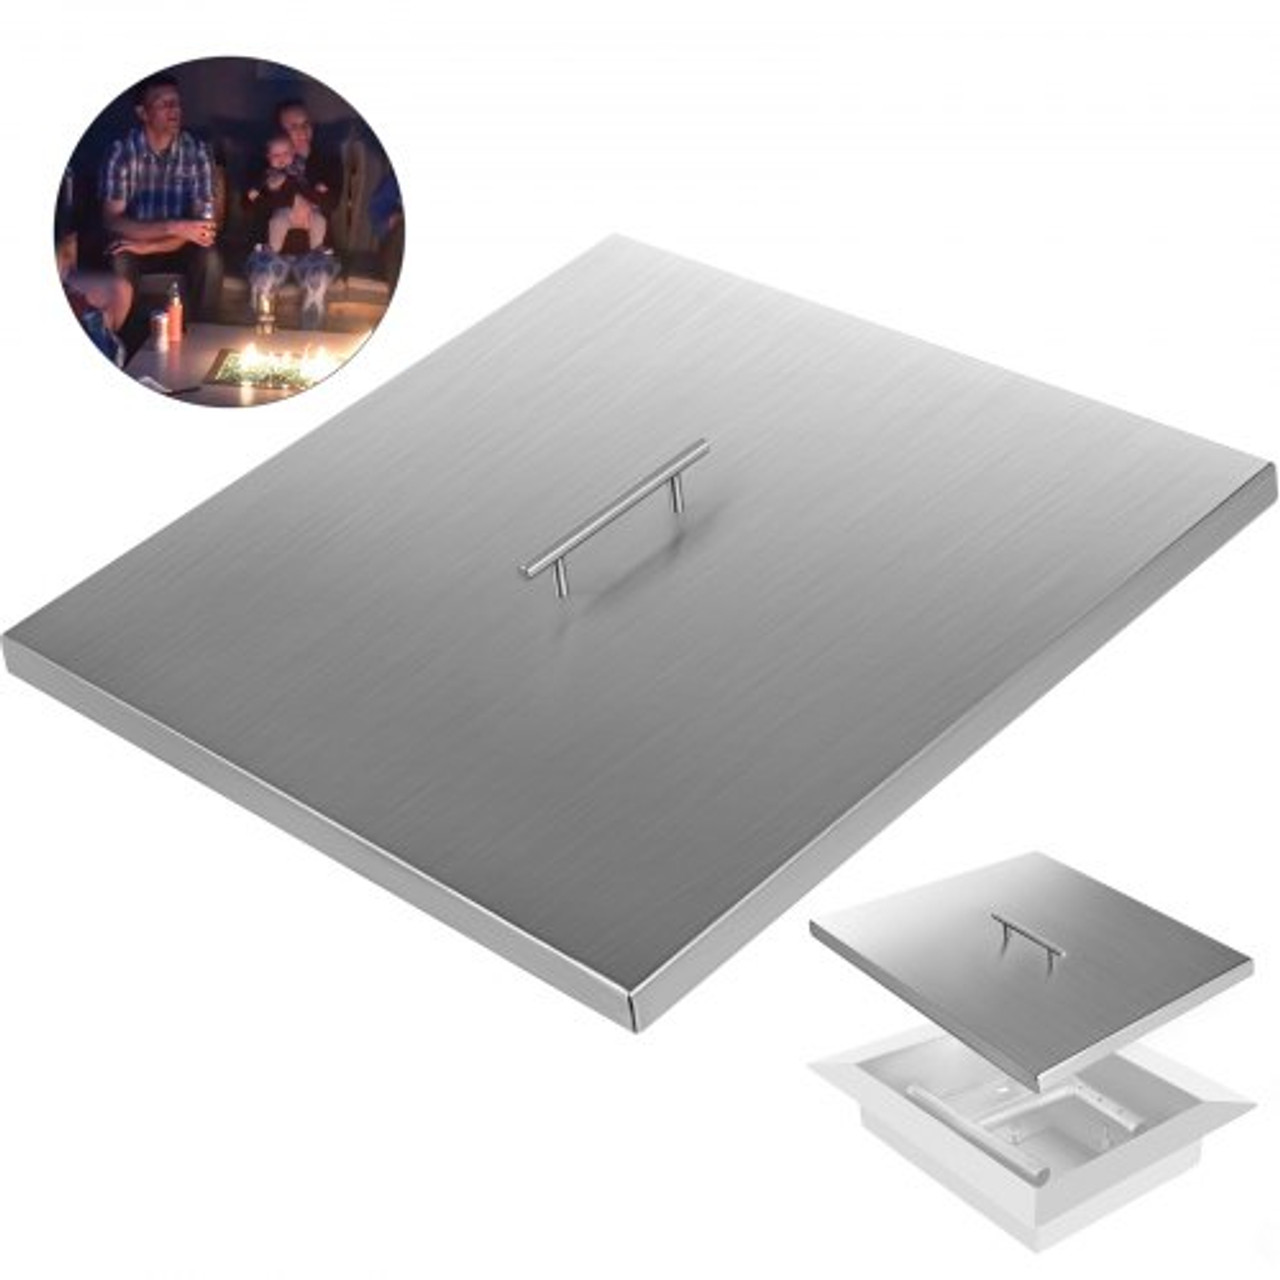 Fire Pit Lid 21 x 21 Inch 1.5mm Thick 430 Stainless Steel Fire Pit Burner Cover Square Fire Pit Lid for Drop-in Fire Pit Pan